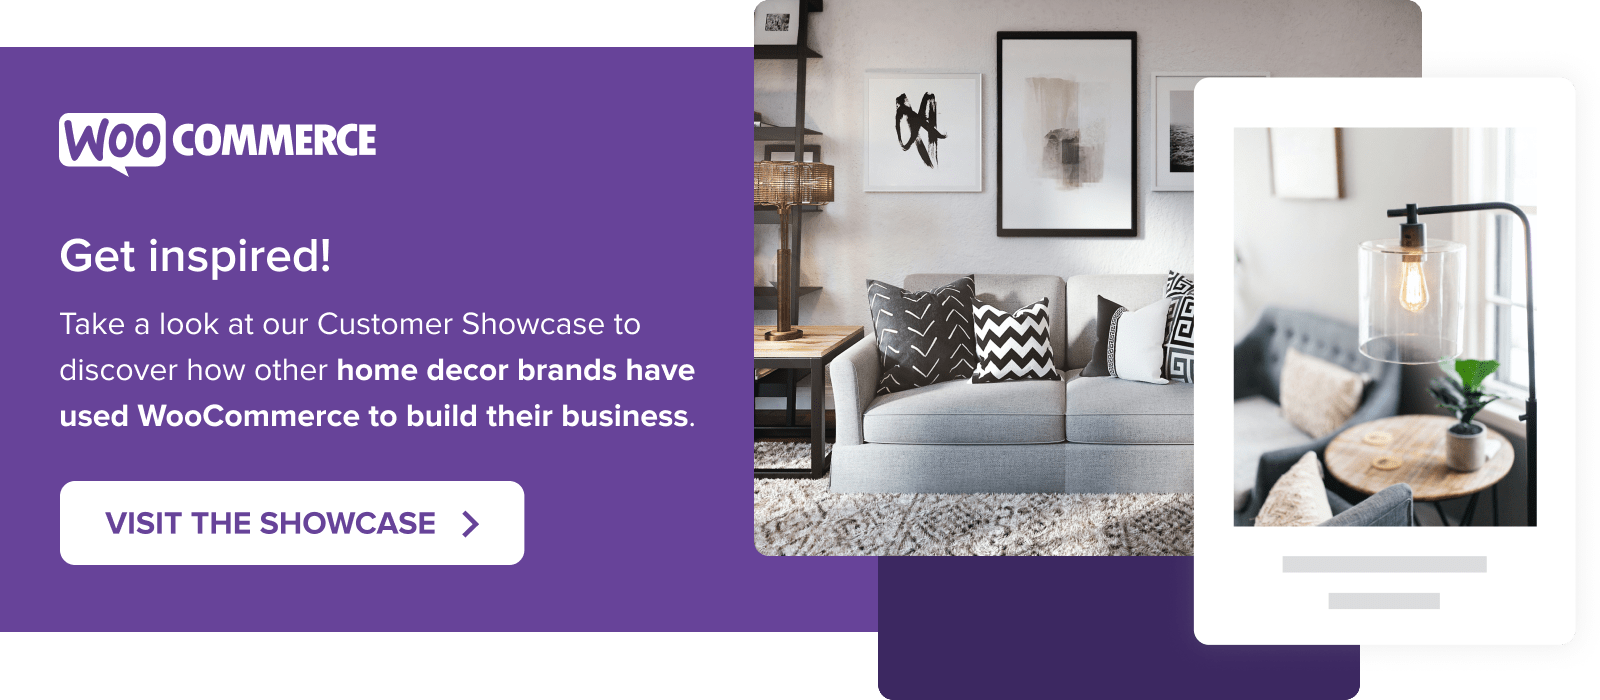 Take a look at our Customer Showcase to discover how other home decor brands have used WooCommerce